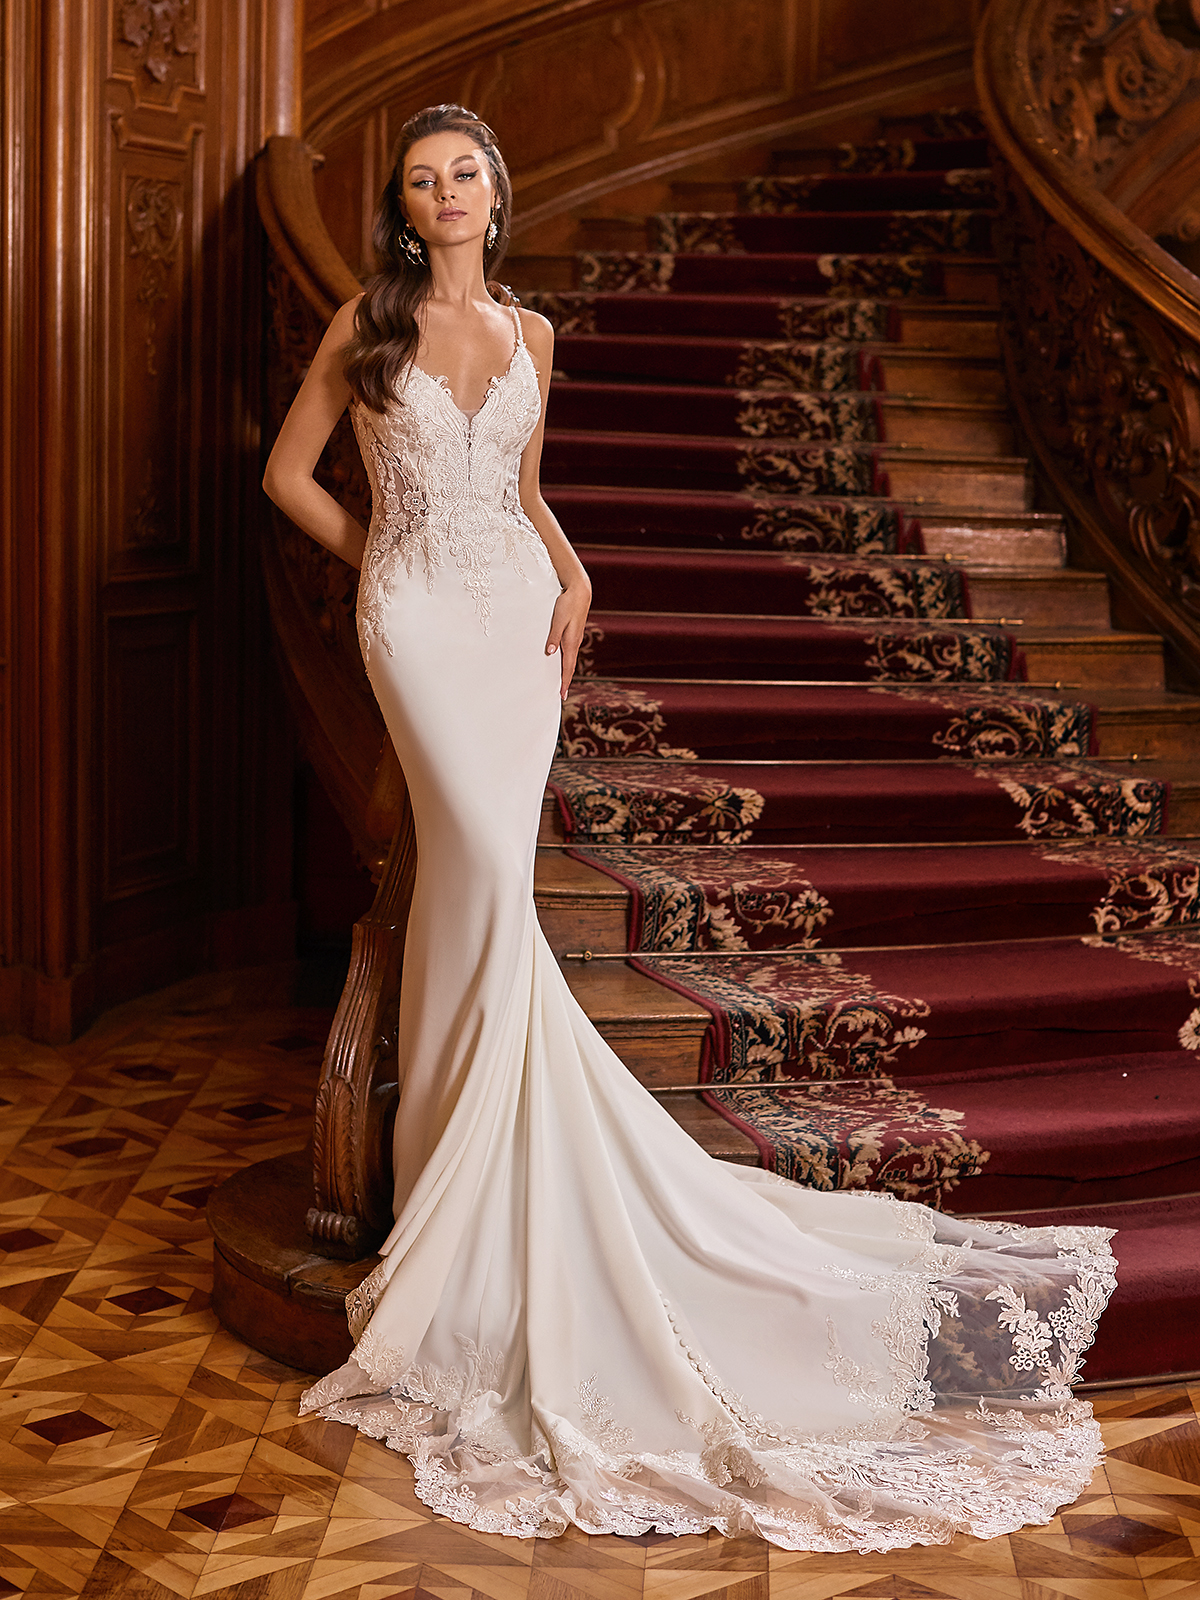 Tall woman wearing a mermaid wedding dress standing next to wooden staircase